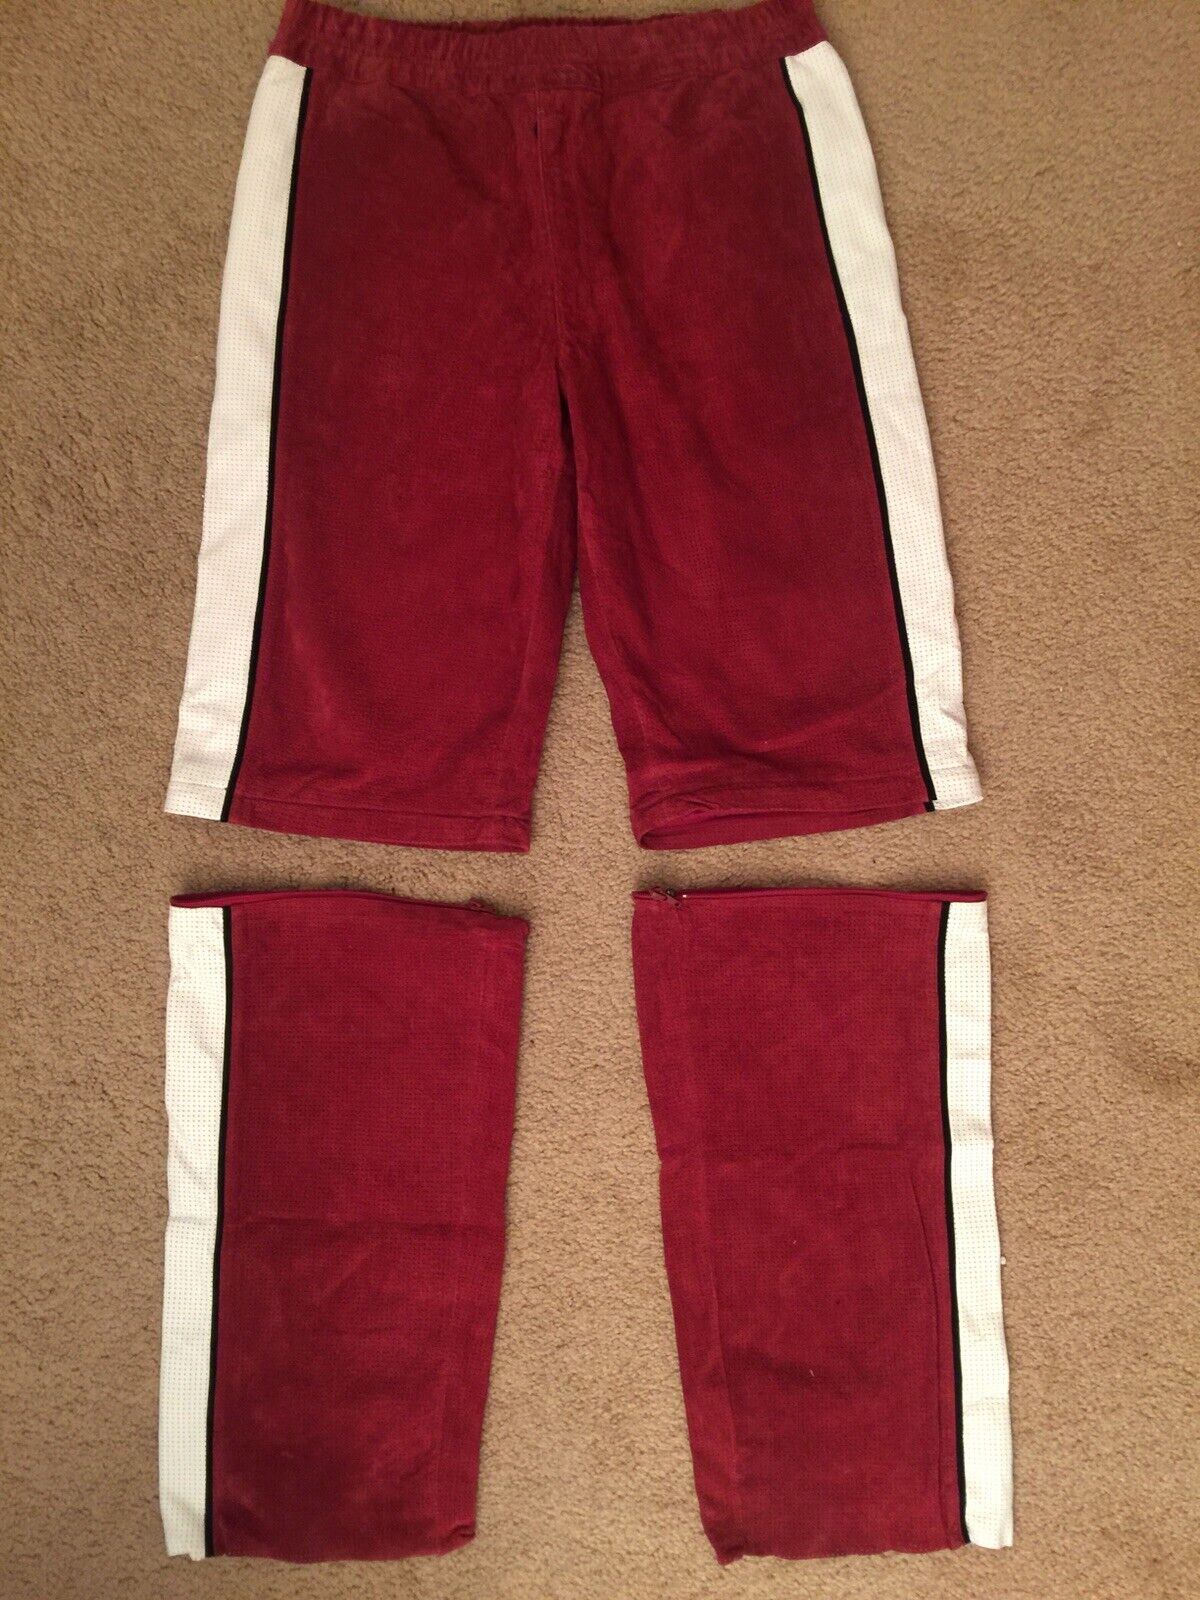 Wilson Football Leather Track Pants Zip Off Short… - image 8